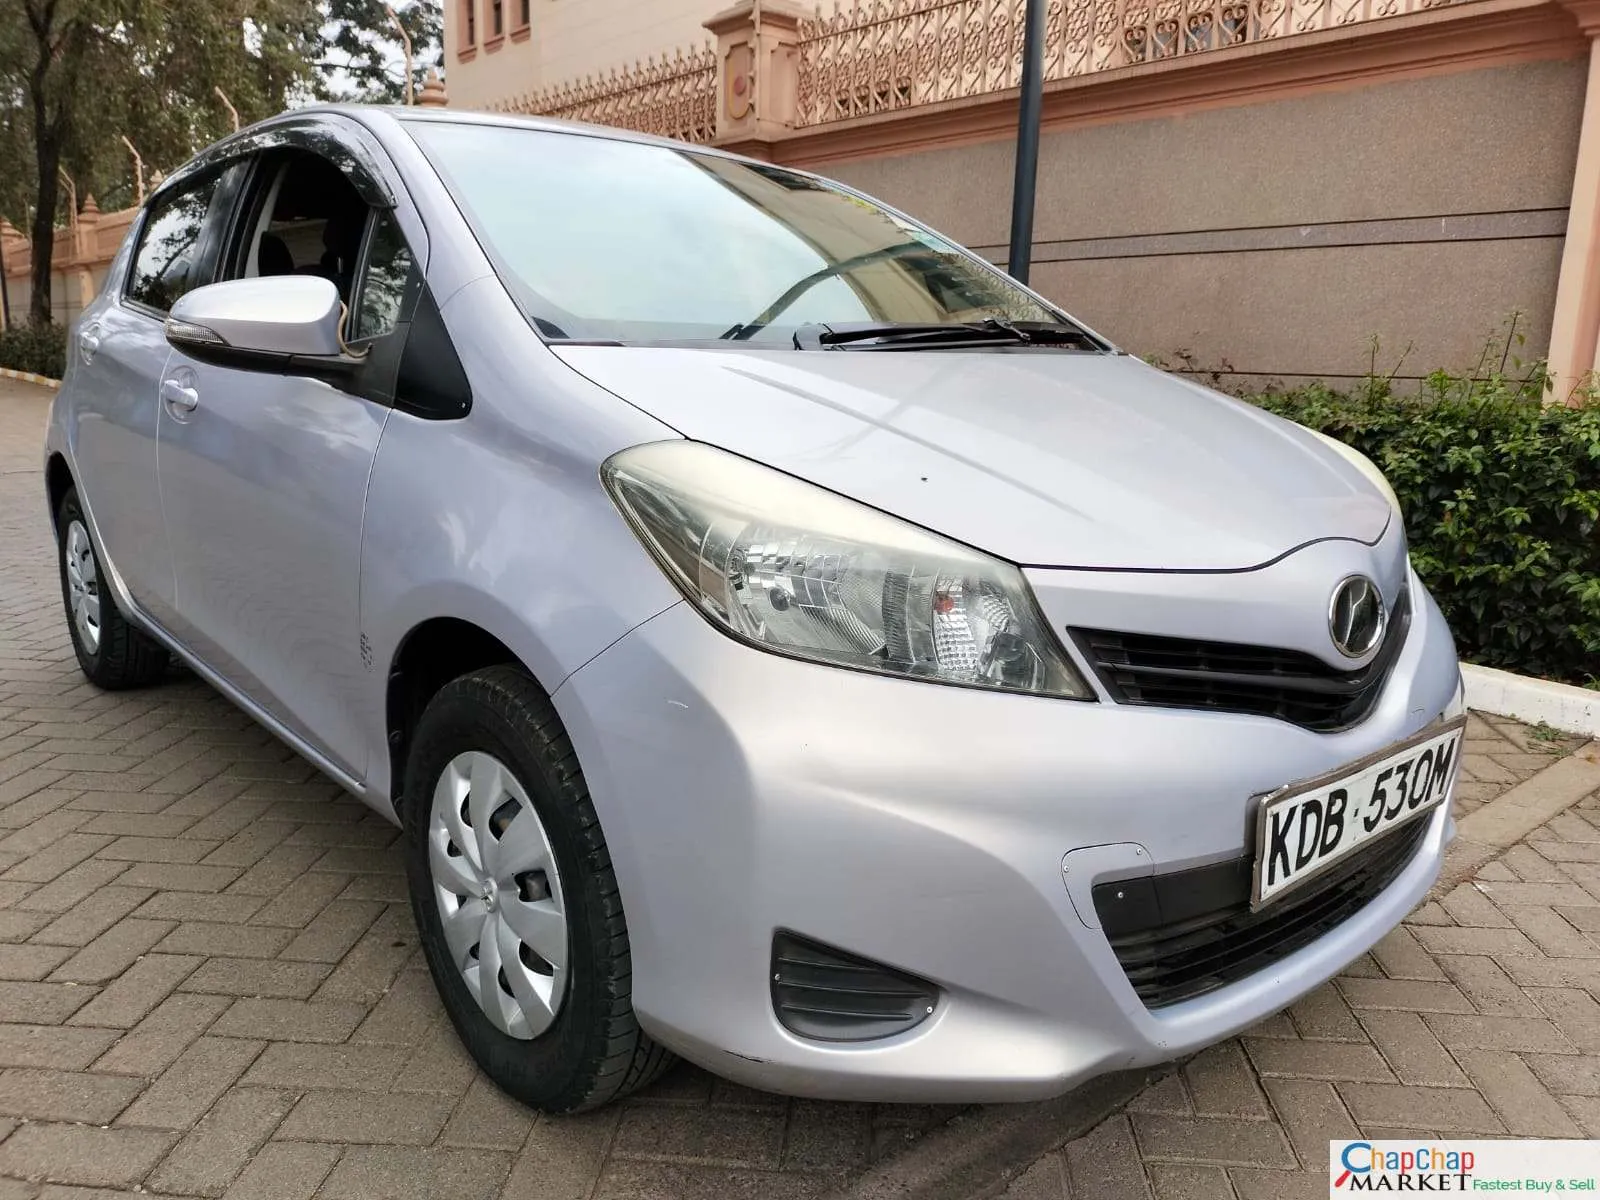 Toyota Vitz for sale in Kenya 🔥 You Pay 30% Deposit Trade in OK EXCLUSIVE Hire Purchase Installments